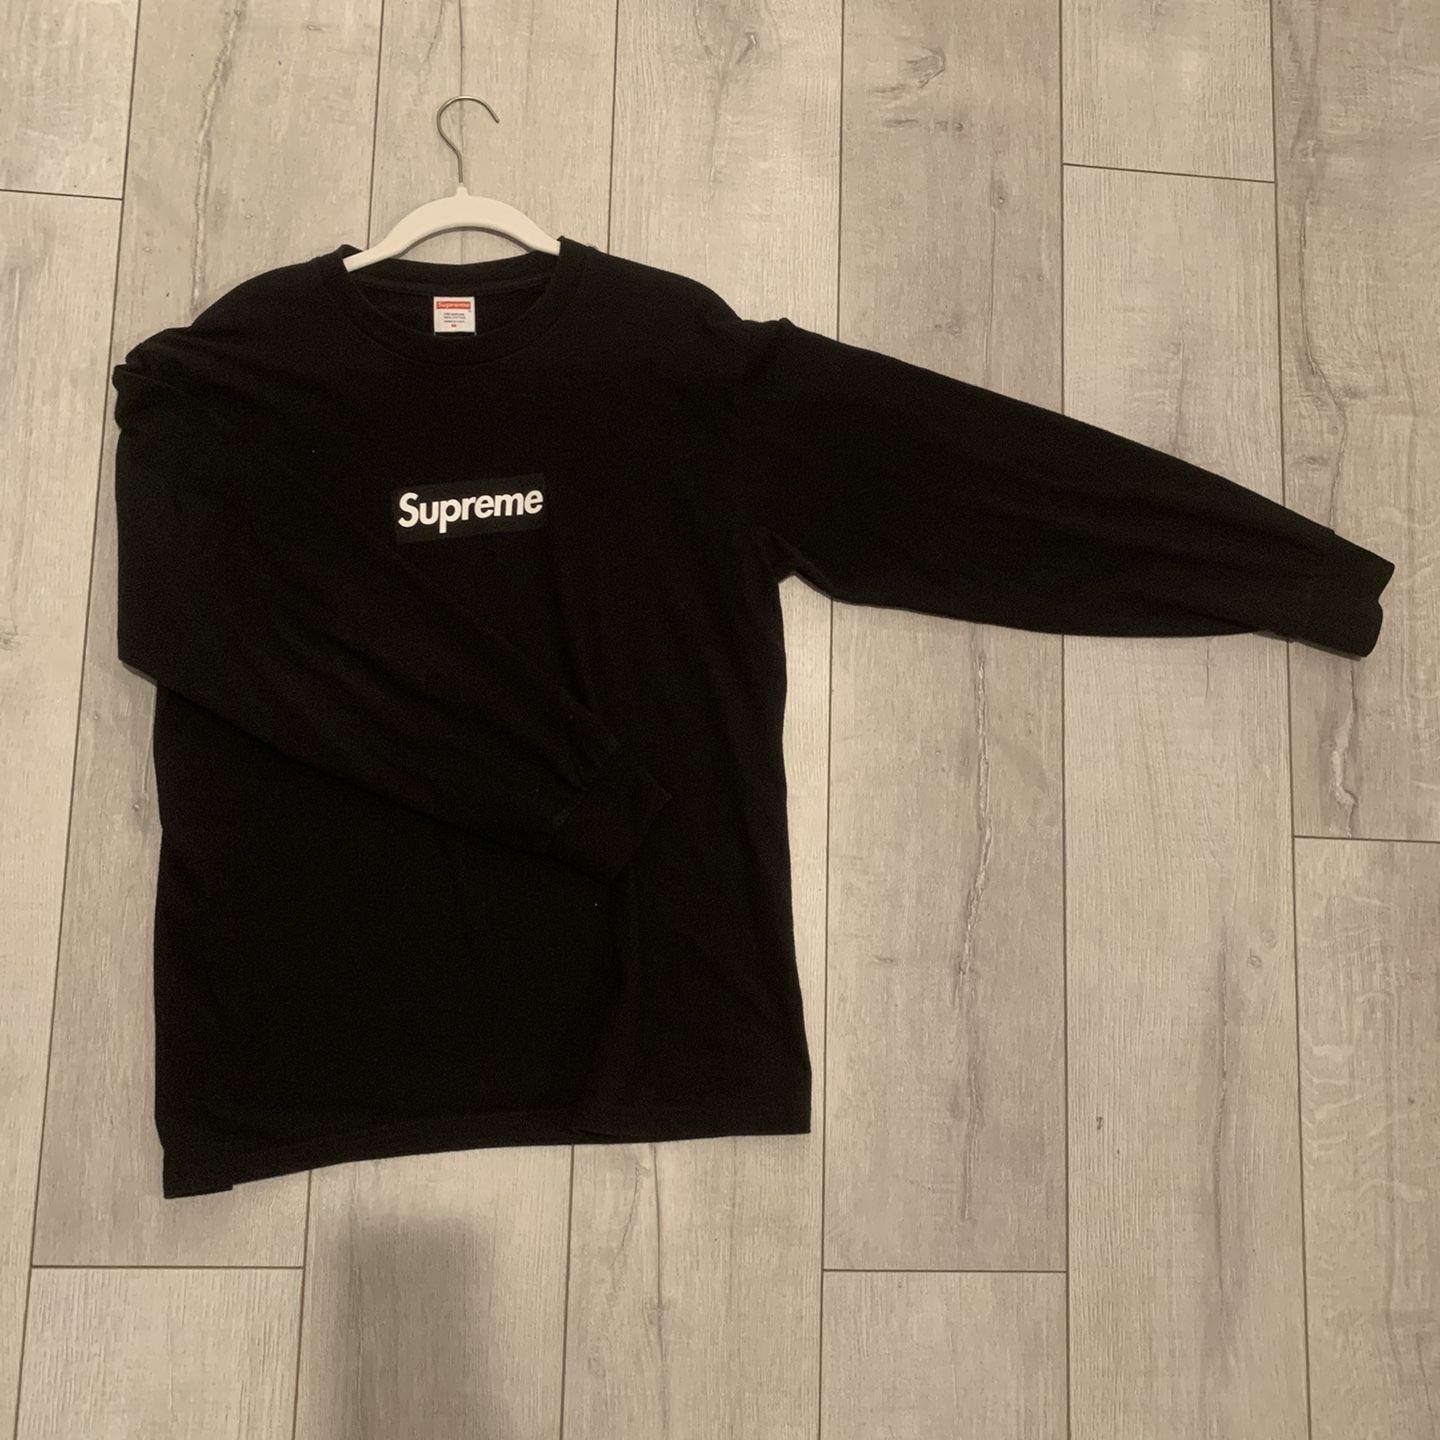 Supreme Box Logo Long Sleeve Tee for Sale in Westminster, CA - OfferUp